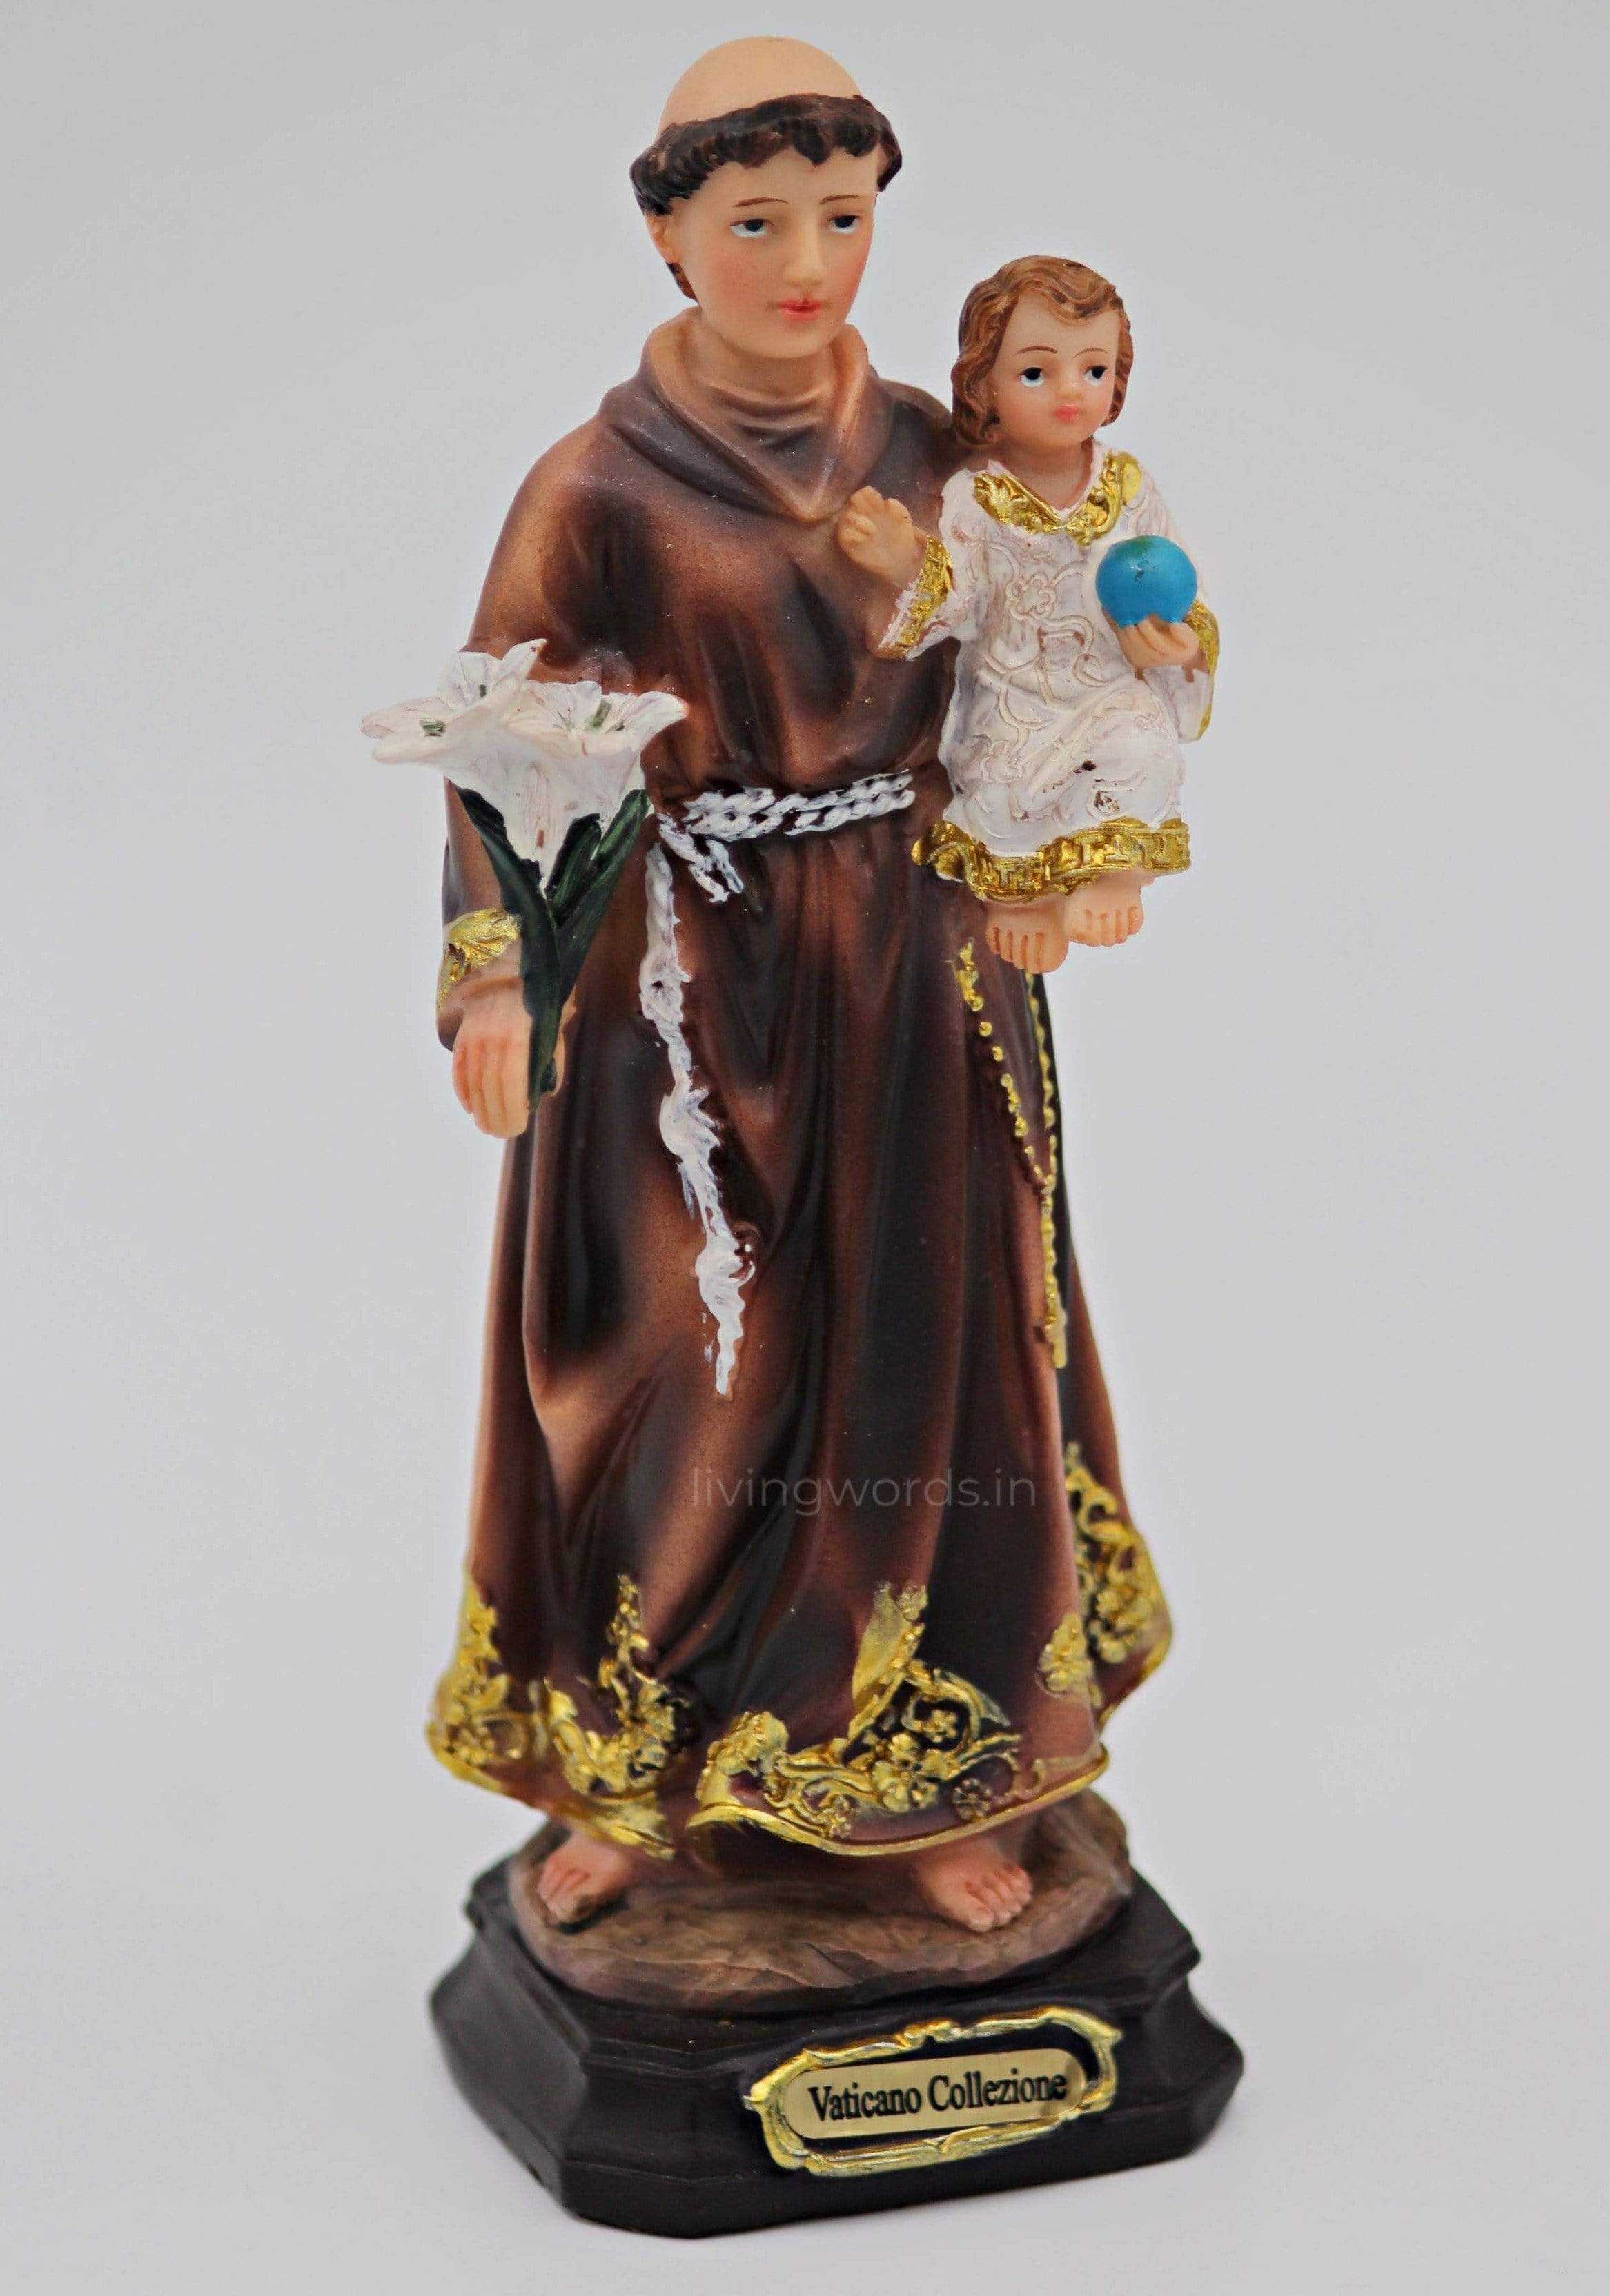 St. Anthony 6 Inch Statue - Patron Saint of Lost Items and Miracles